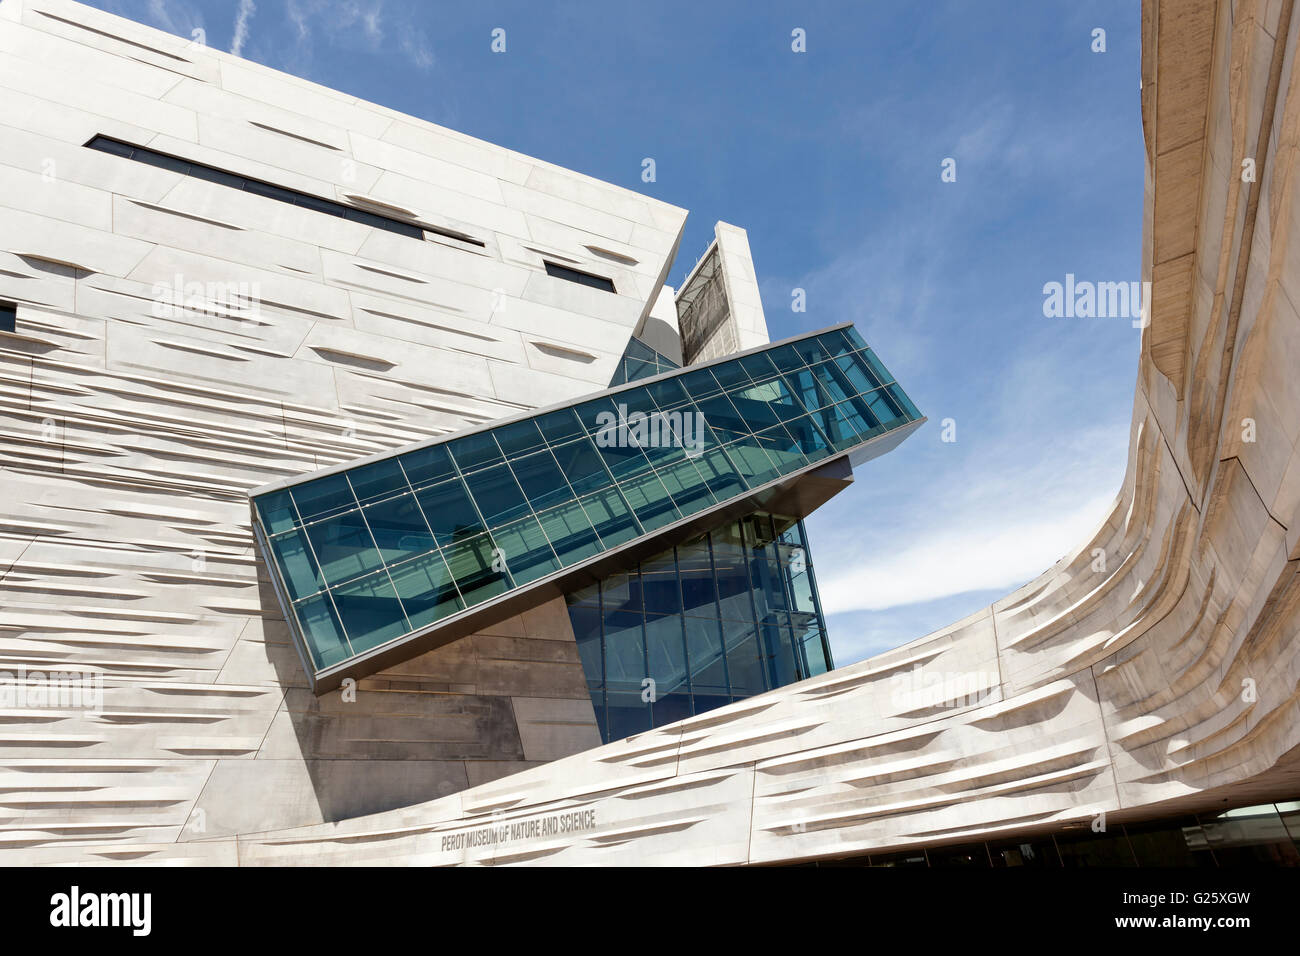 The Perot Museum of Nature and Science in Dallas, TX, USA Stock Photo